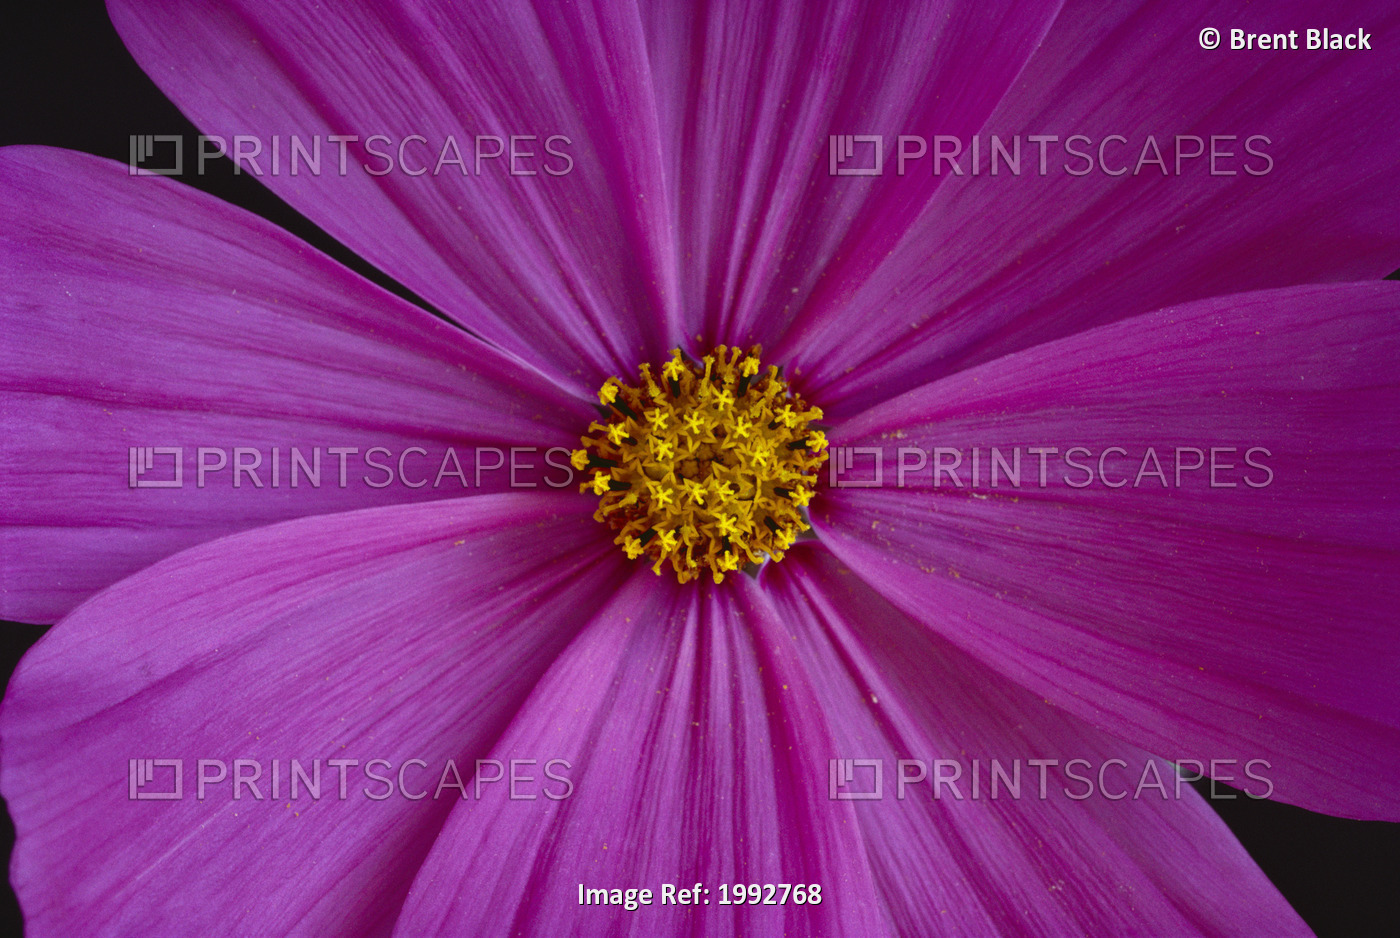 California, Close-Up Of Single Pink Aster, Yellow Center.